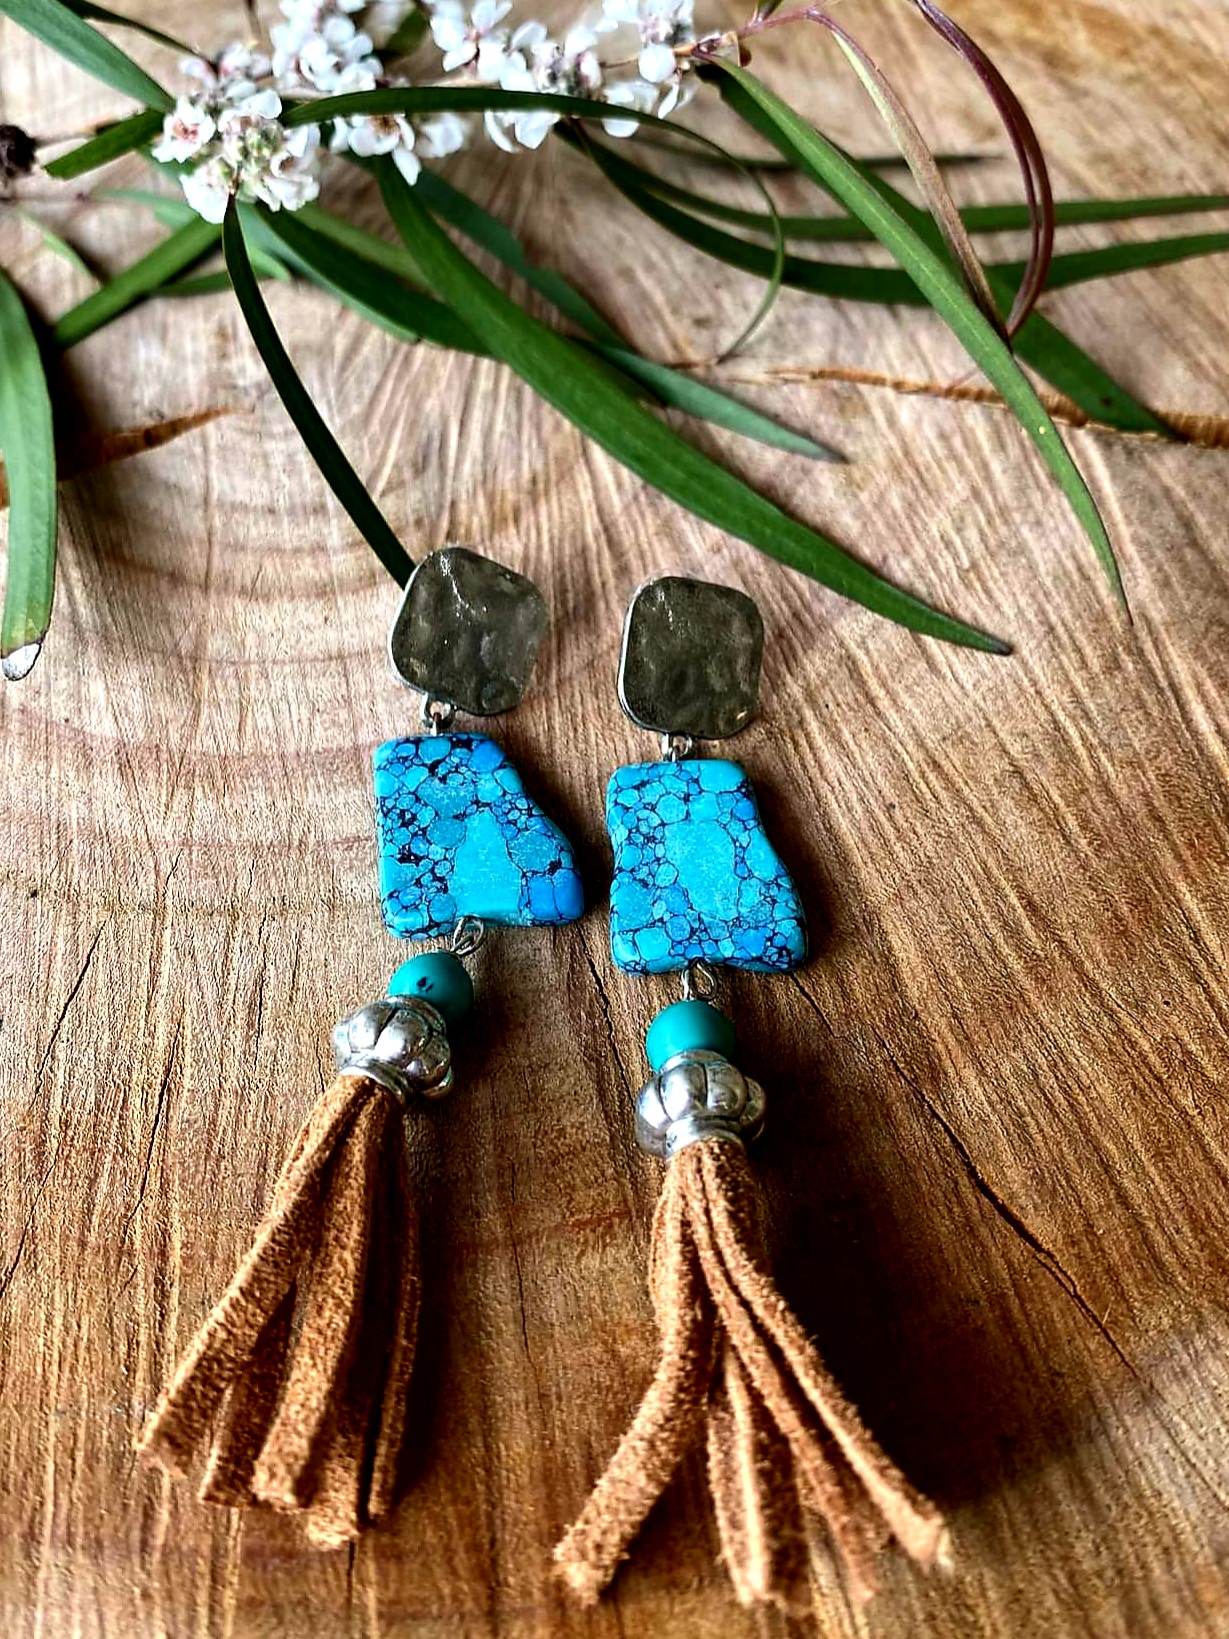 Earings - Western Inspired Tassle earing with Faux Turquoise